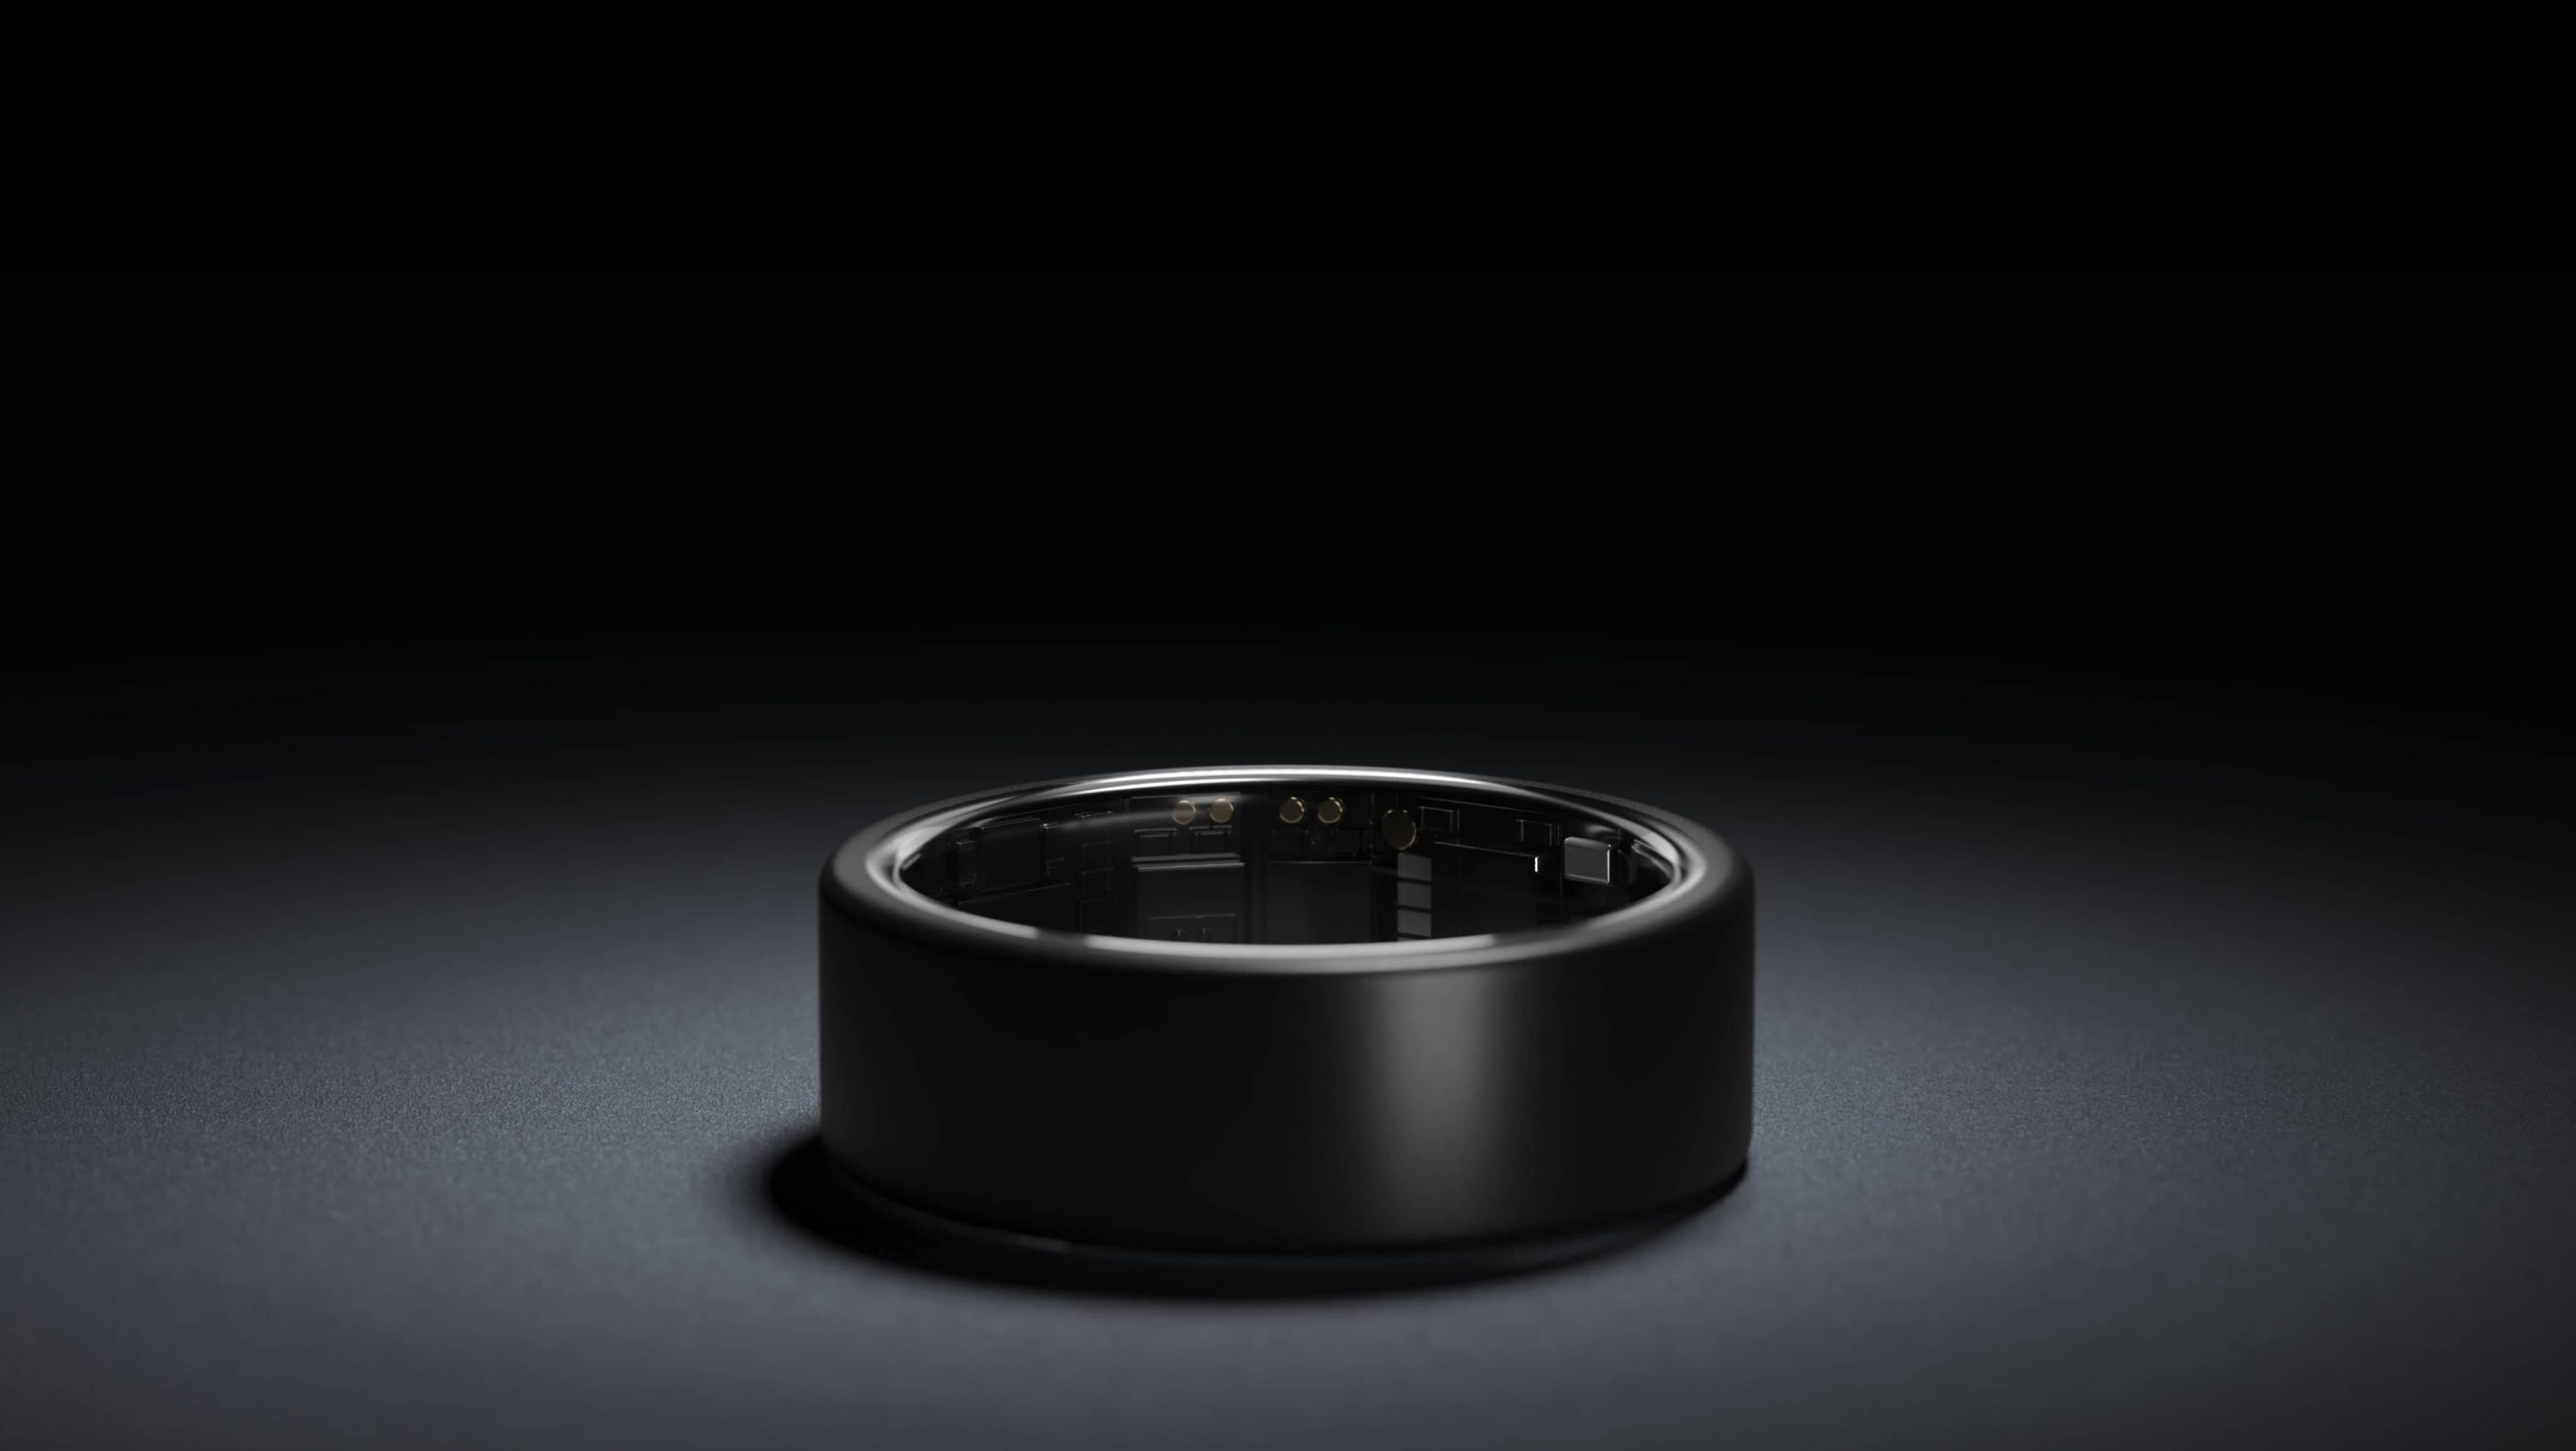 A black smart ring with a sleek design is placed on a dark surface, illuminated by soft lighting. The interior of the ring reveals technical components, showcasing its role in the connected fitness industry.